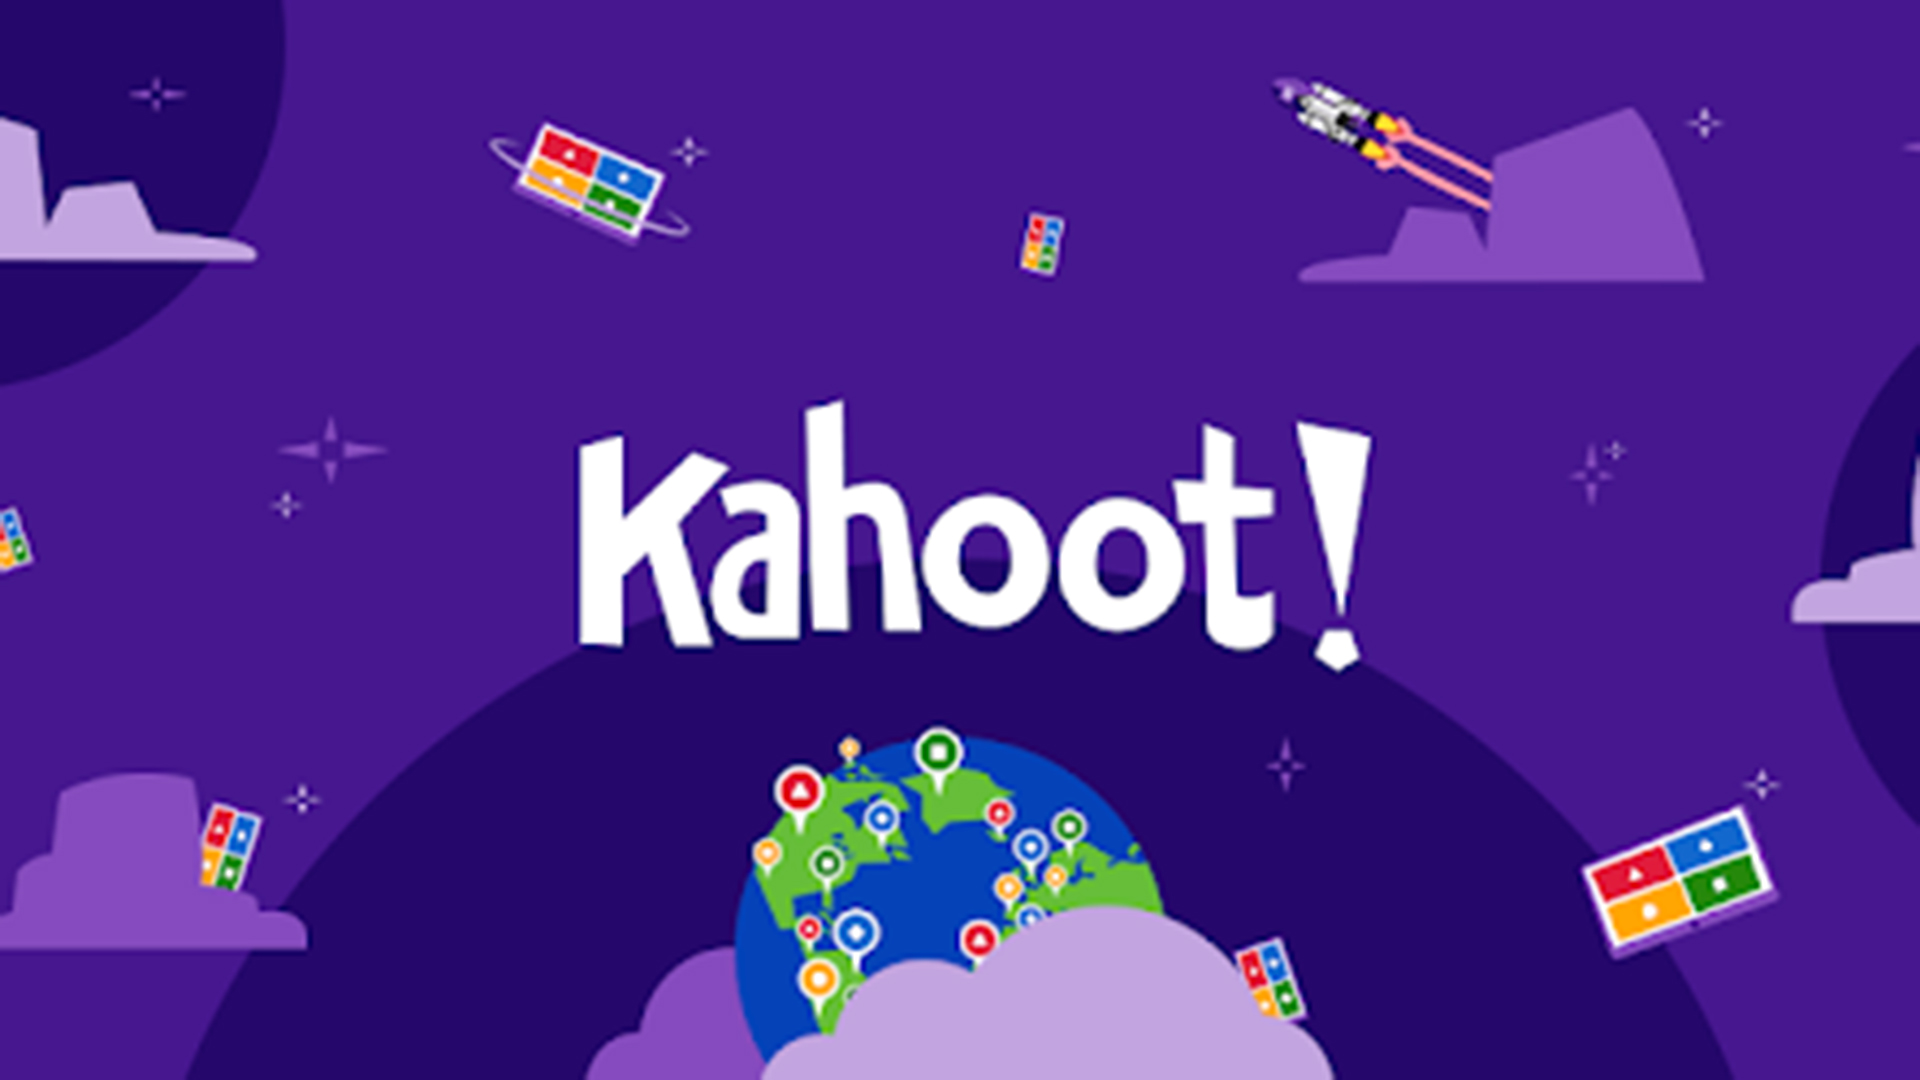 What are The Best Free Alternatives to Kahoot